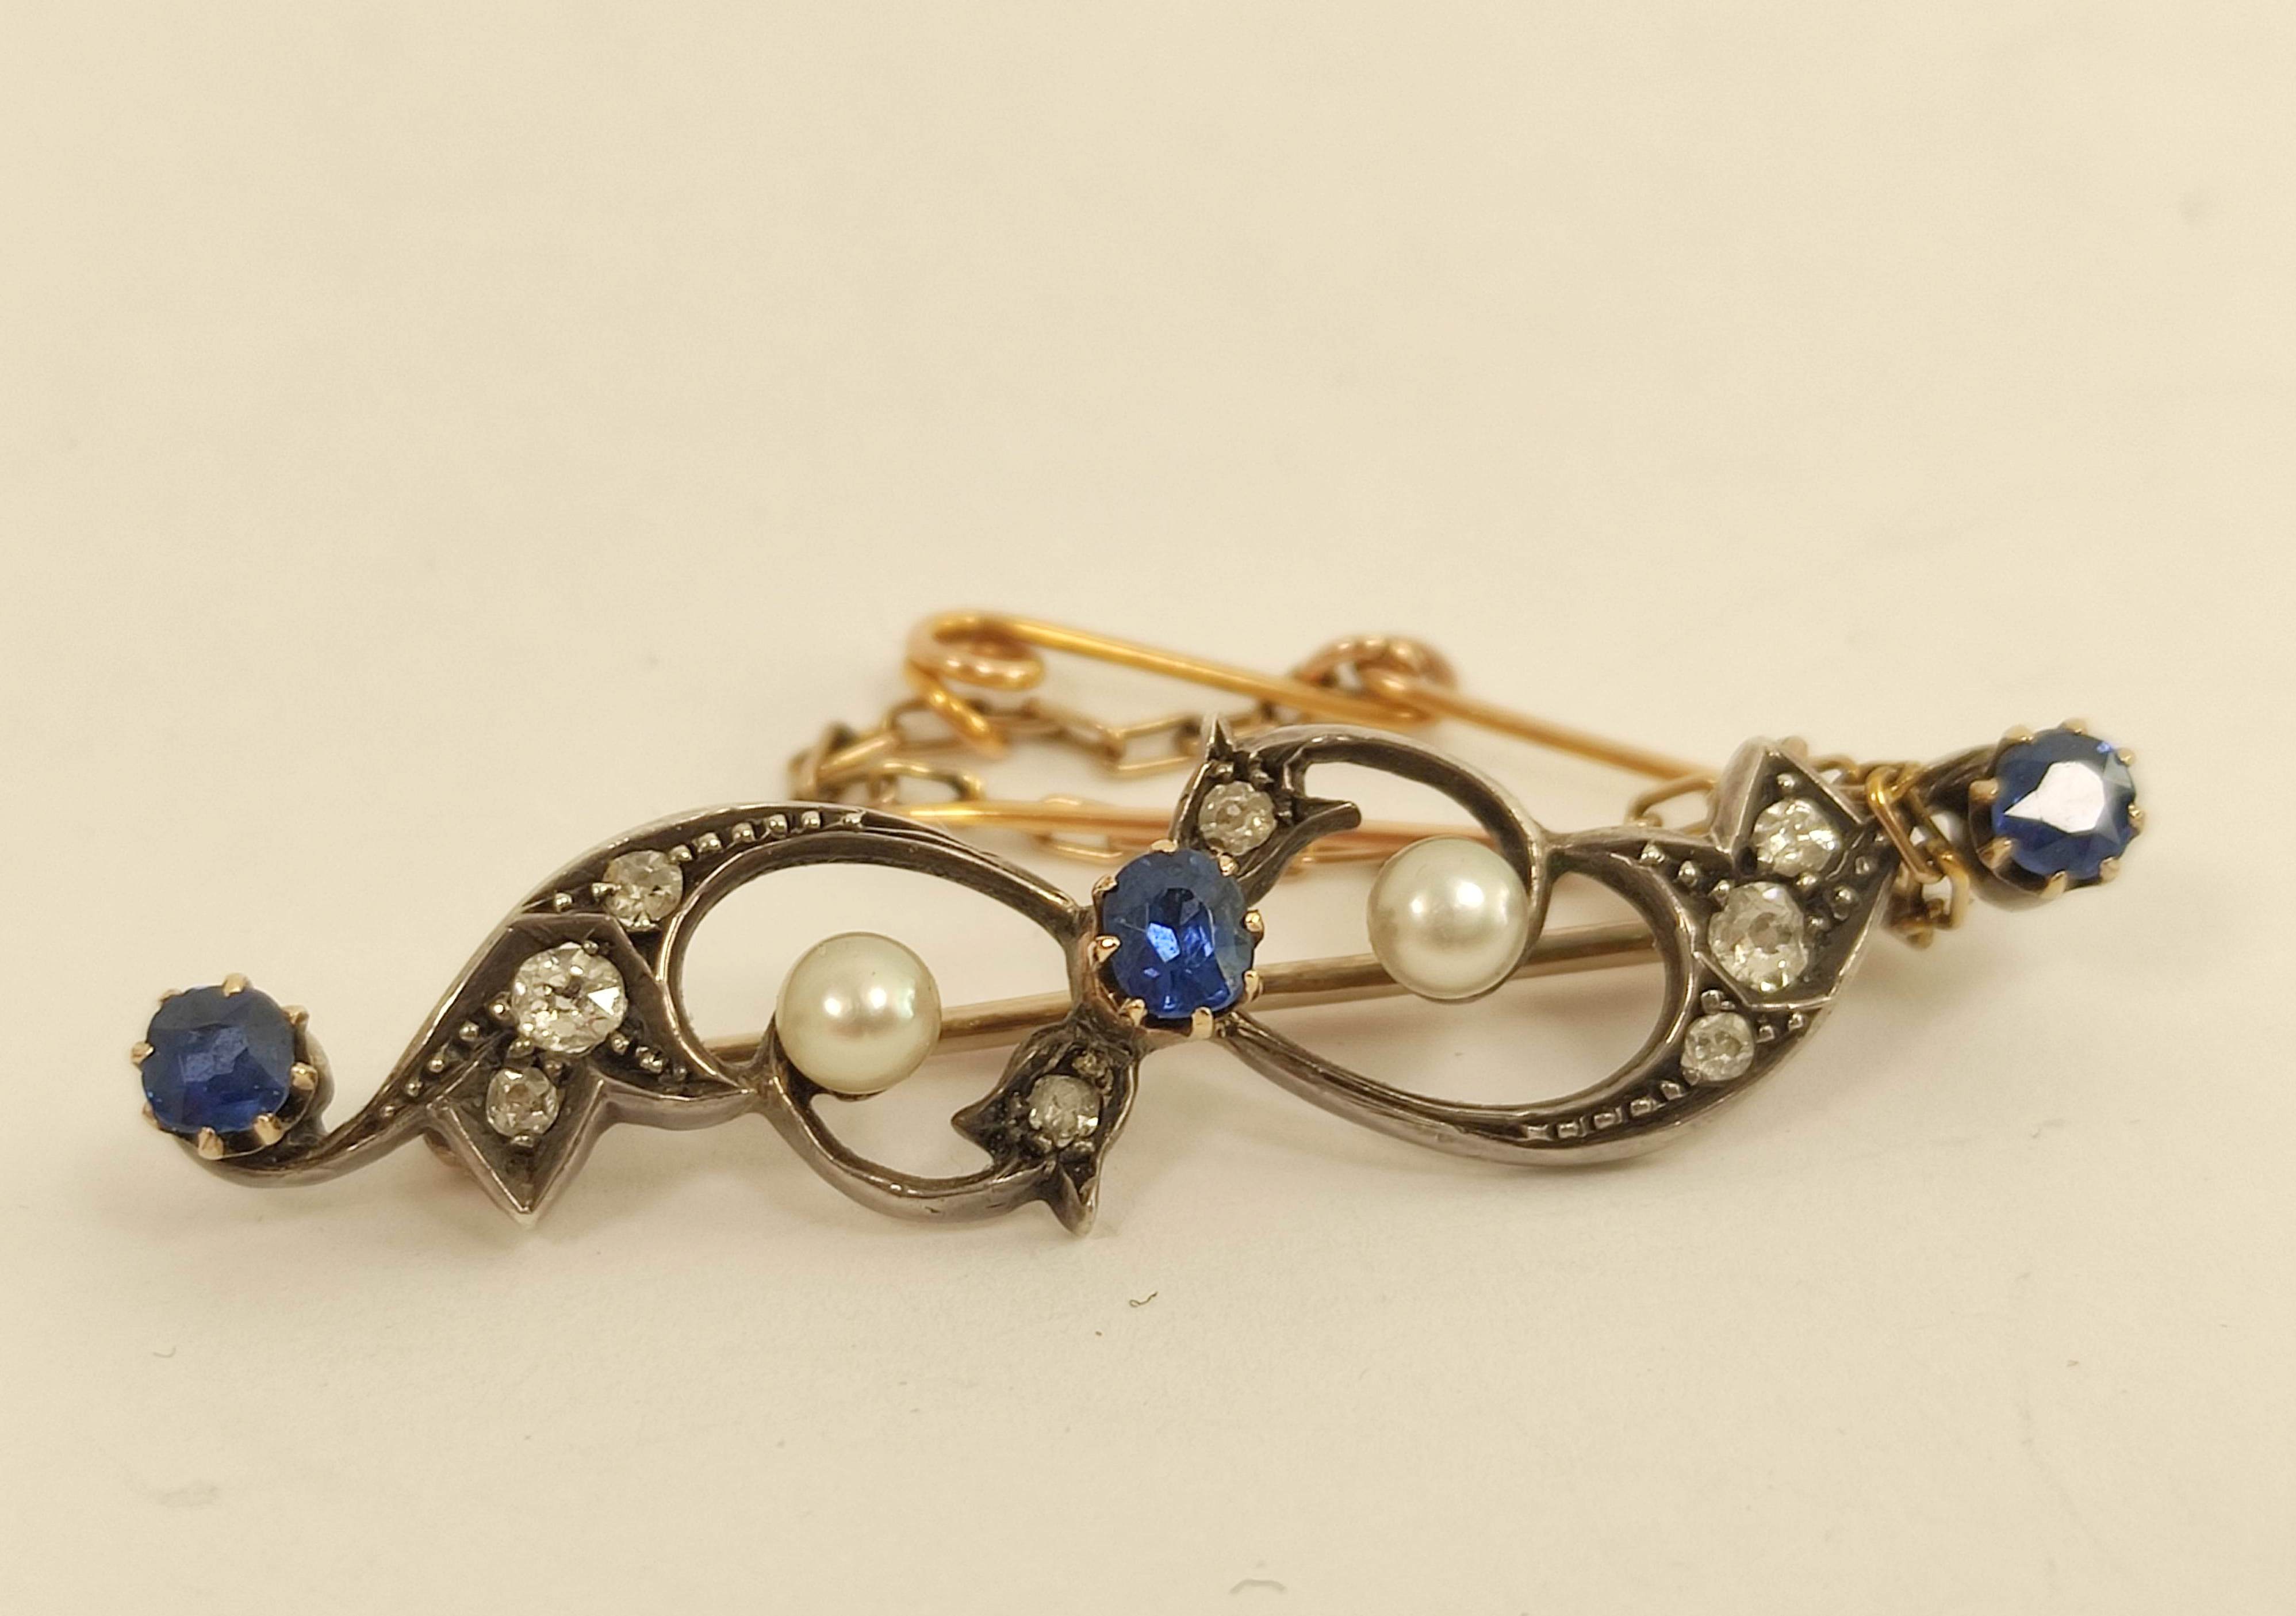 Edwardian gold brooch with scrolls of three sapphires and diamonds in gold and silver. - Image 3 of 6